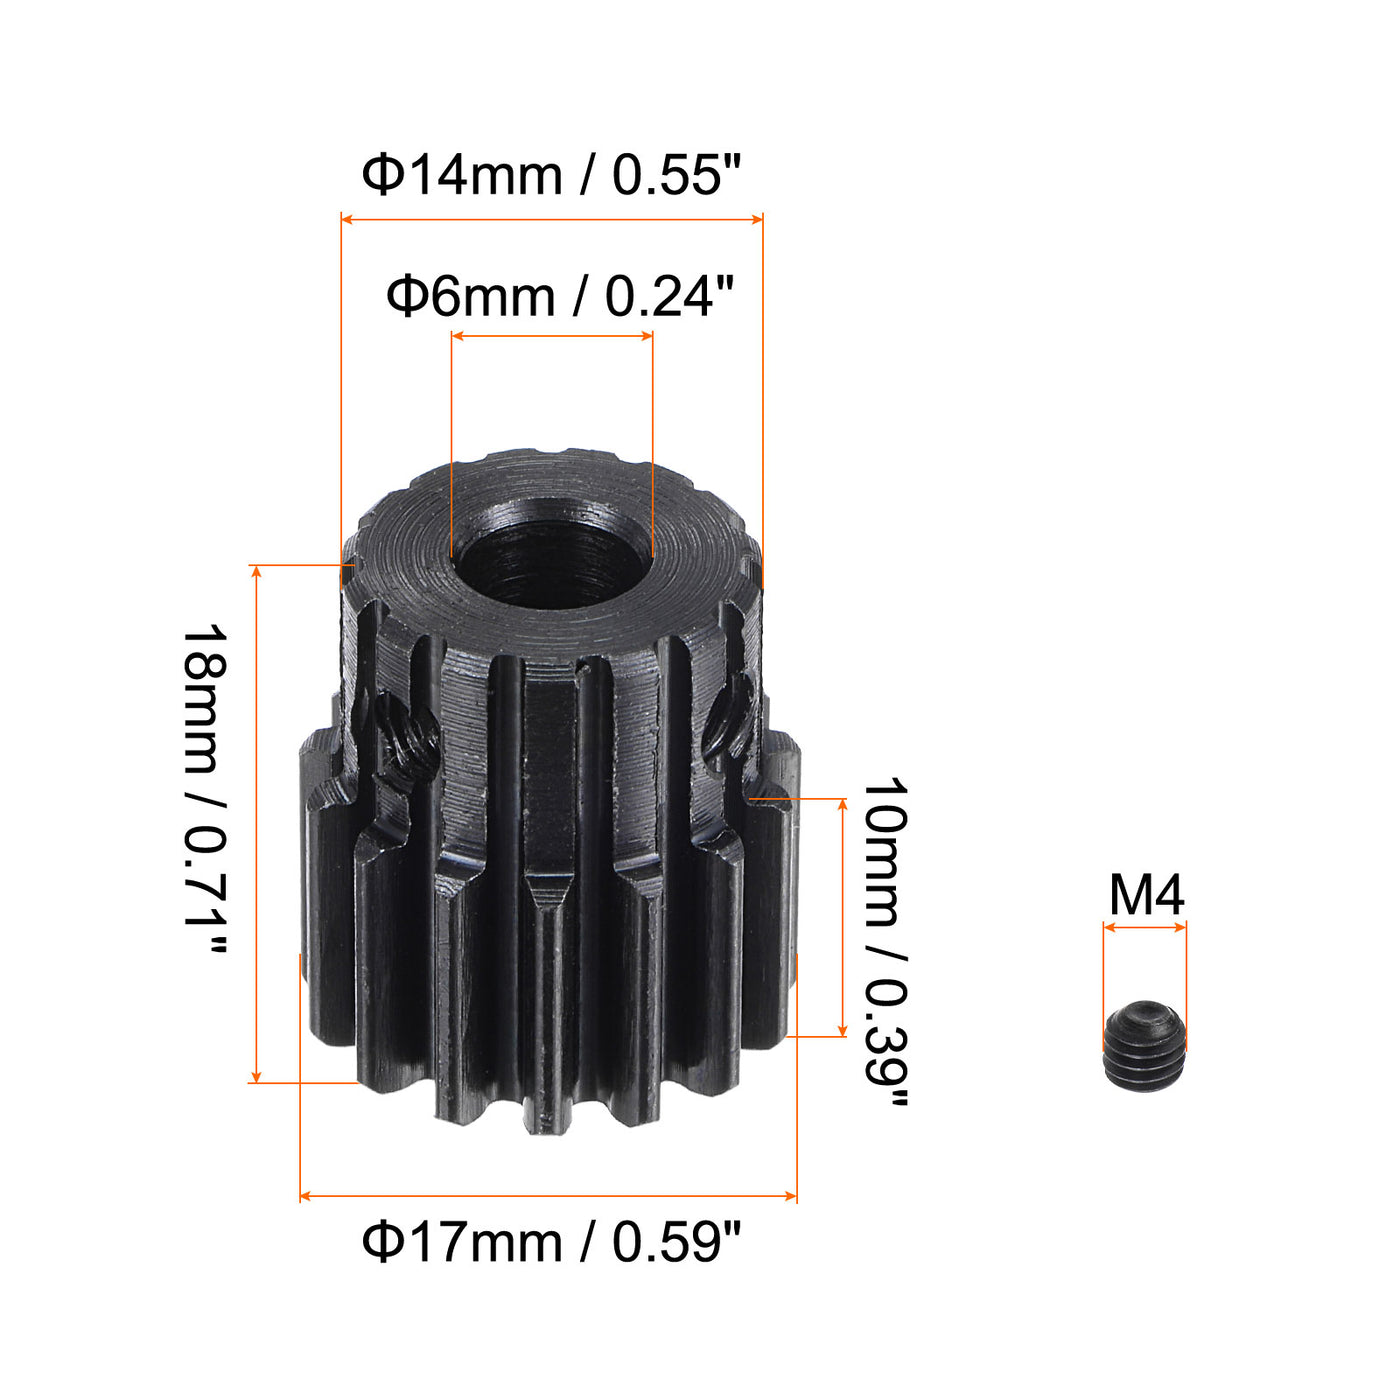 uxcell Uxcell 6mm Aperture 15T Mod 1 45# Steel Spur Diff Differential Motor Pinion Gear